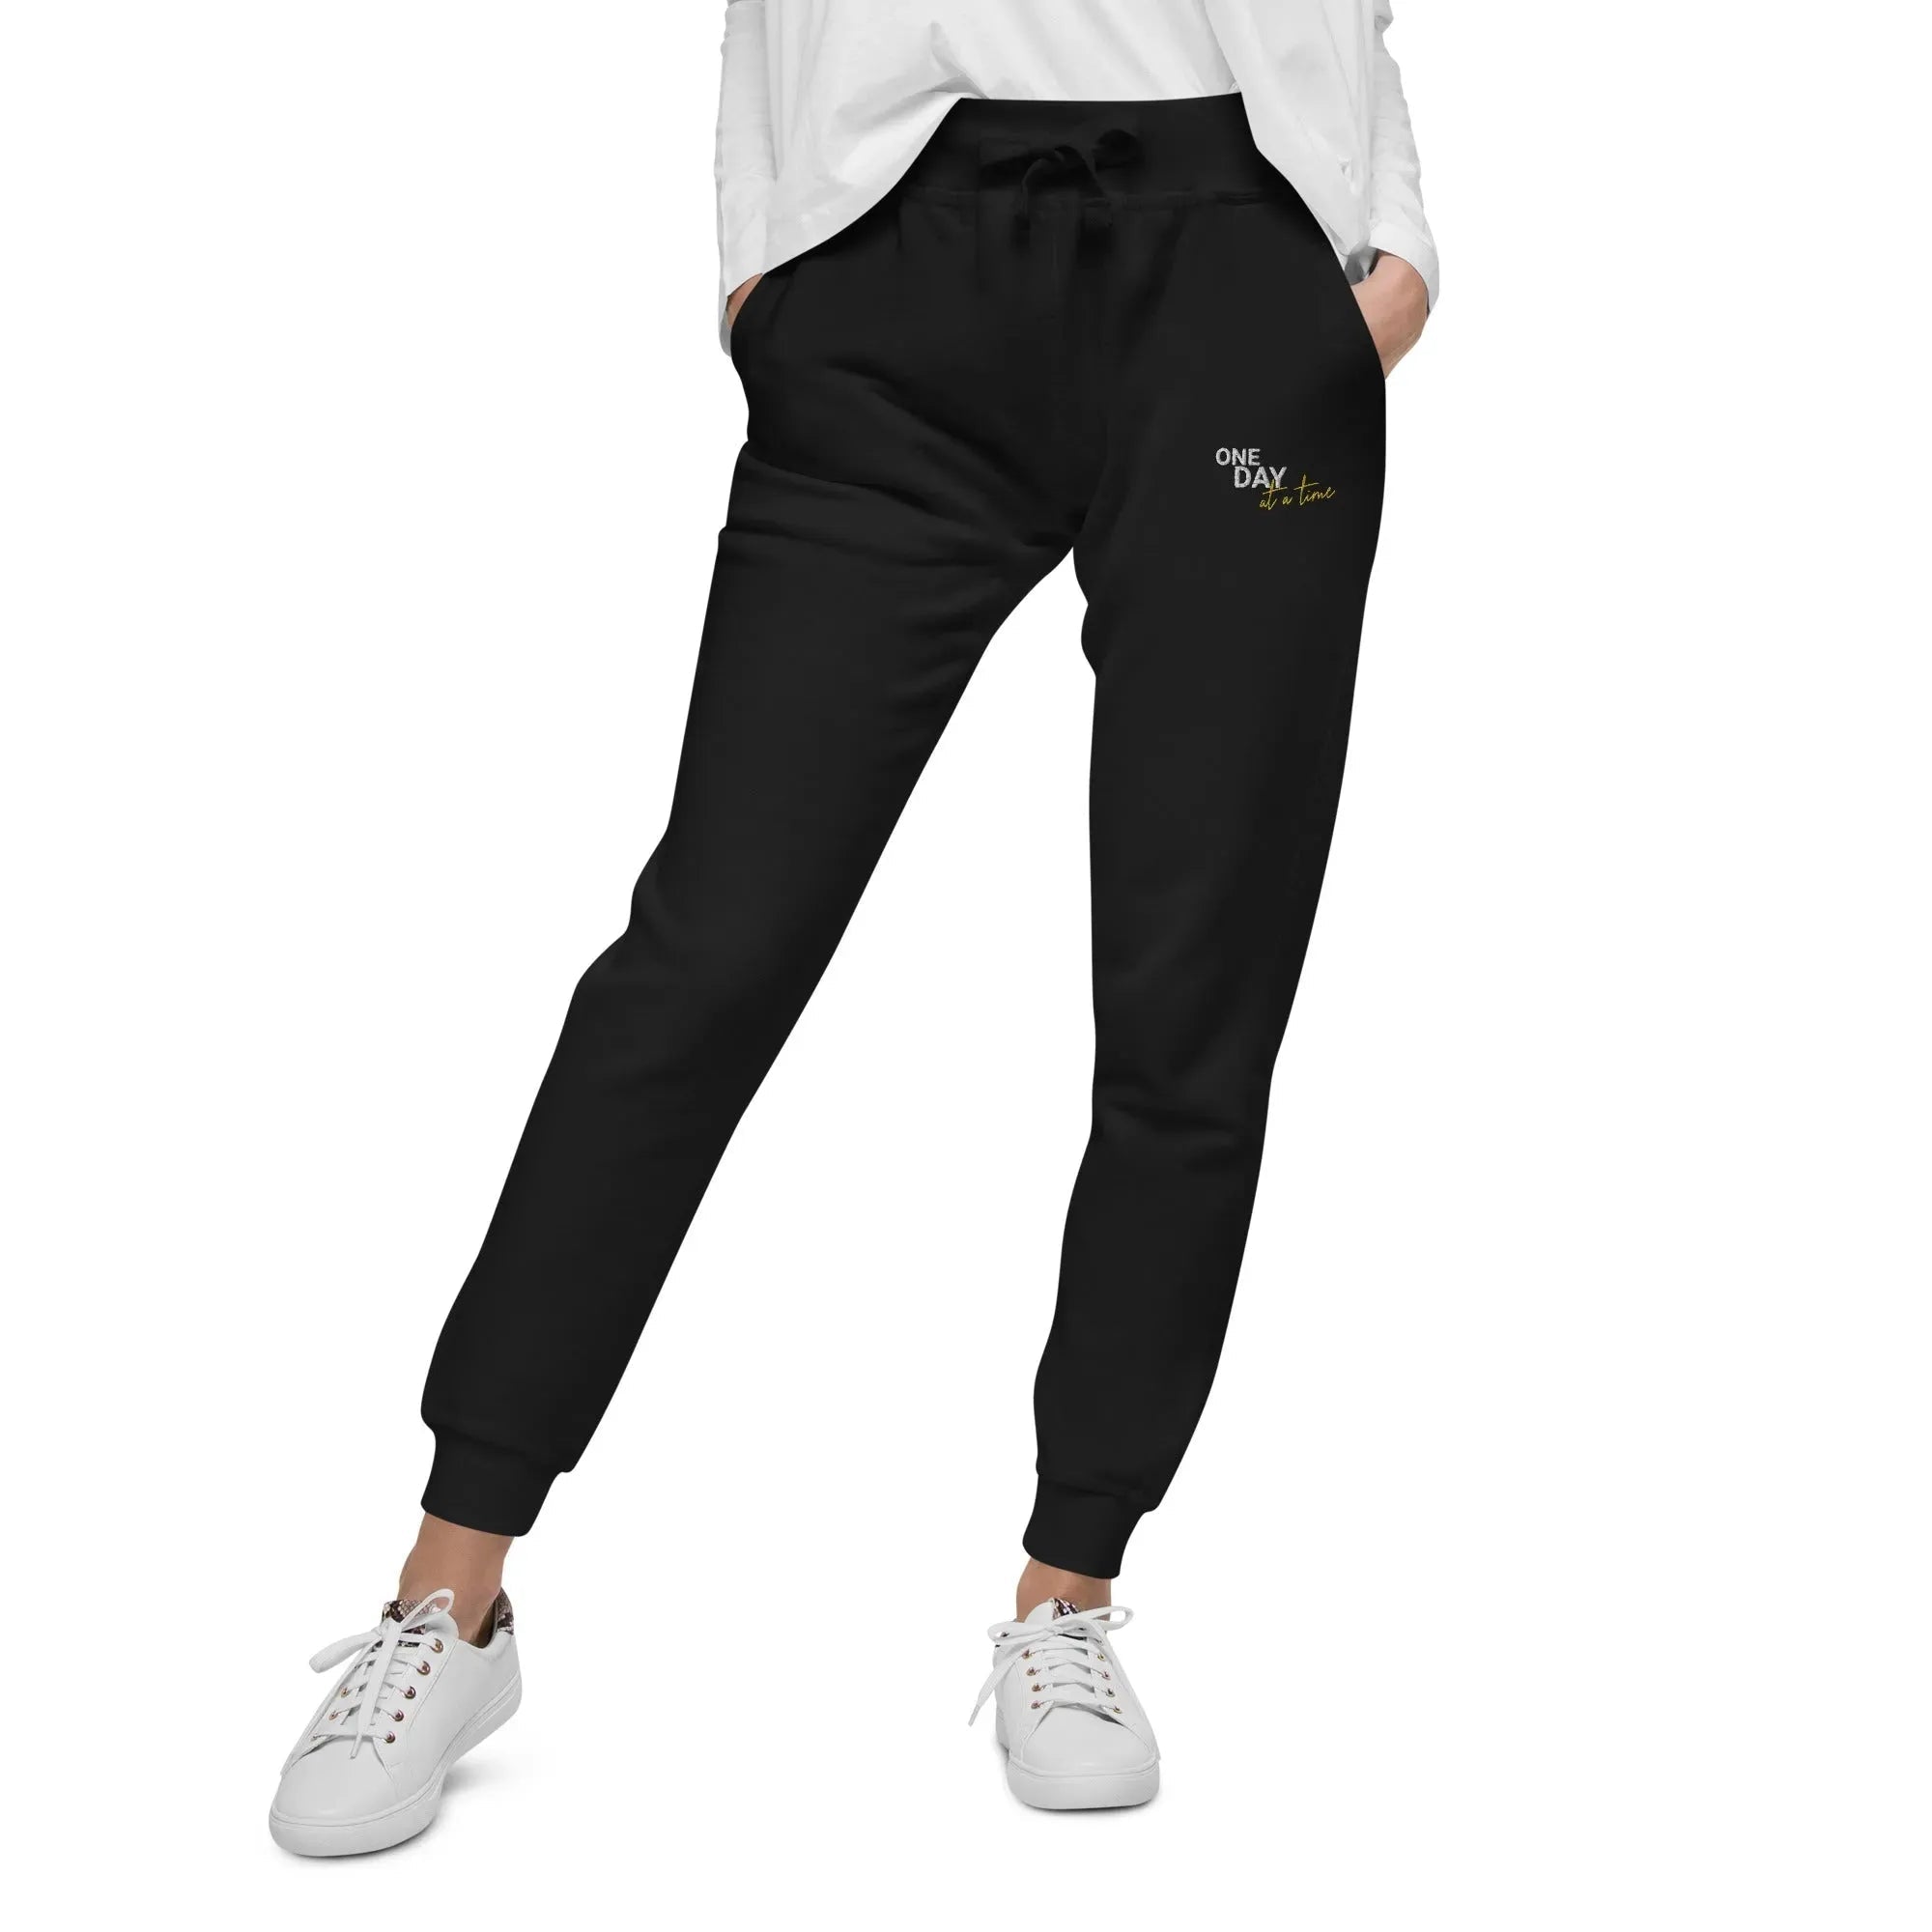 One Day At A Time - Embroidered Unisex fleece sweatpants - | Sobervation